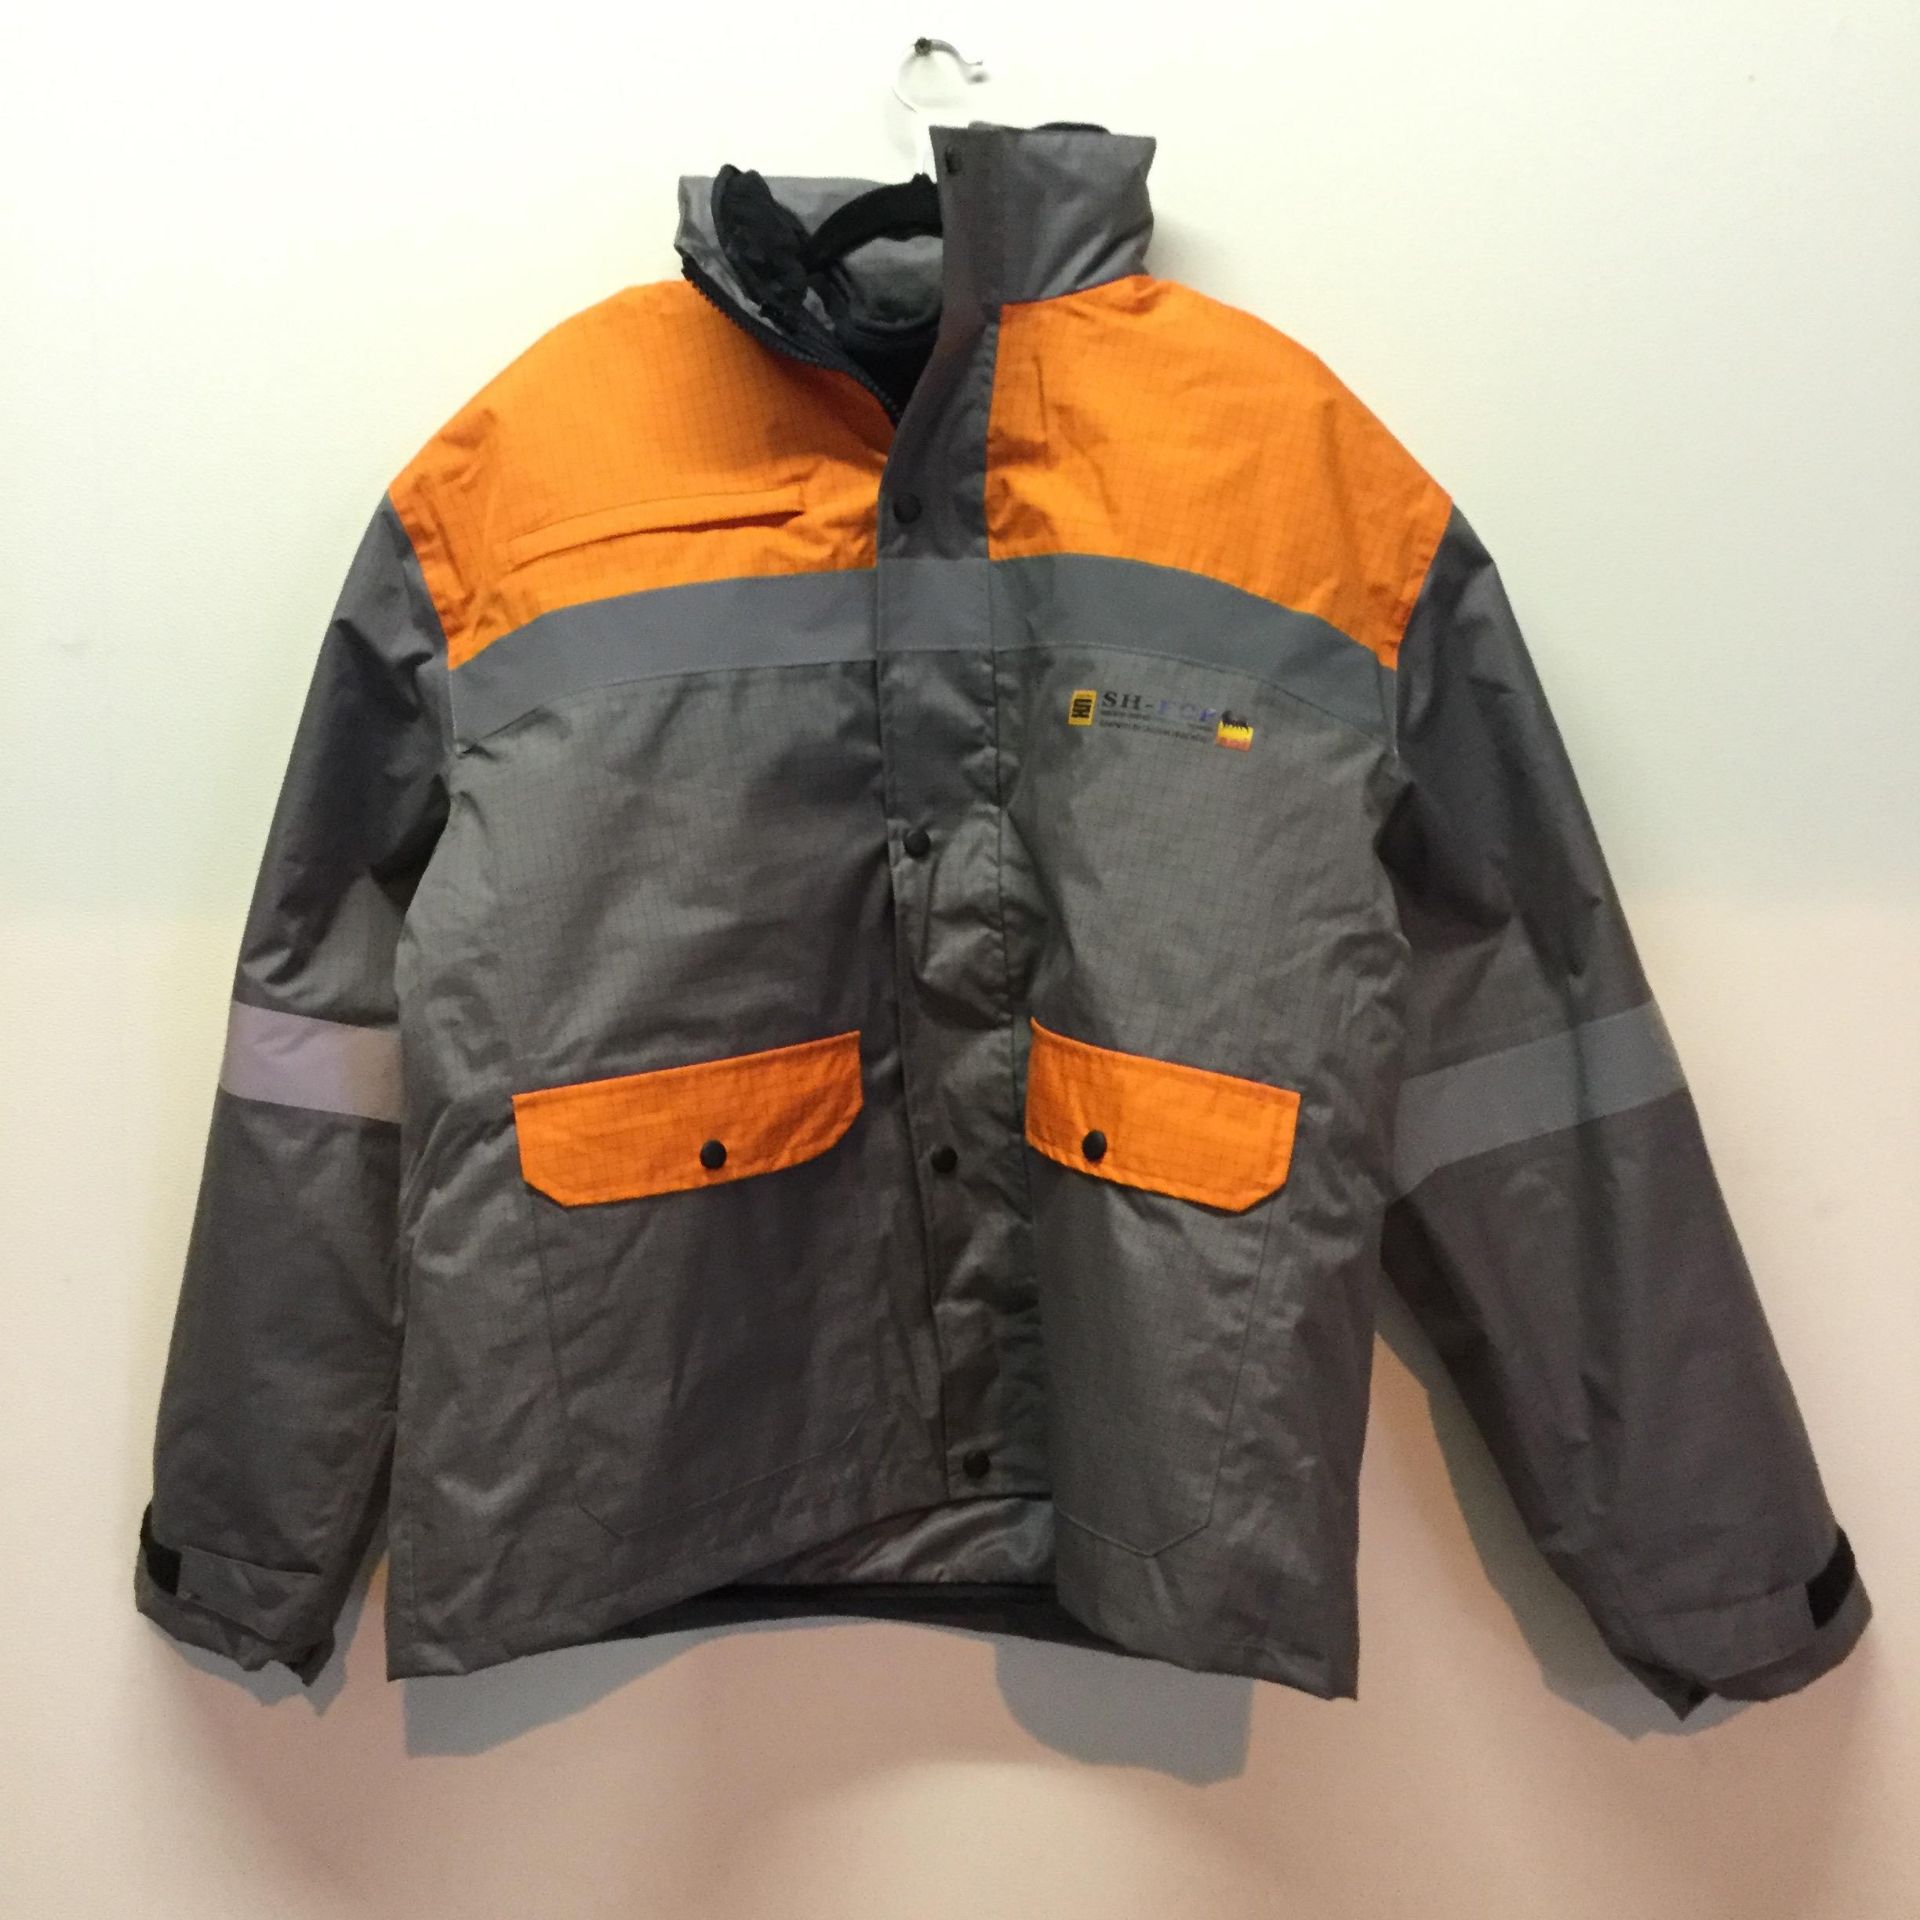 All Weather 3 layer Gortex Antistatic waterproof Jackets - Size 52